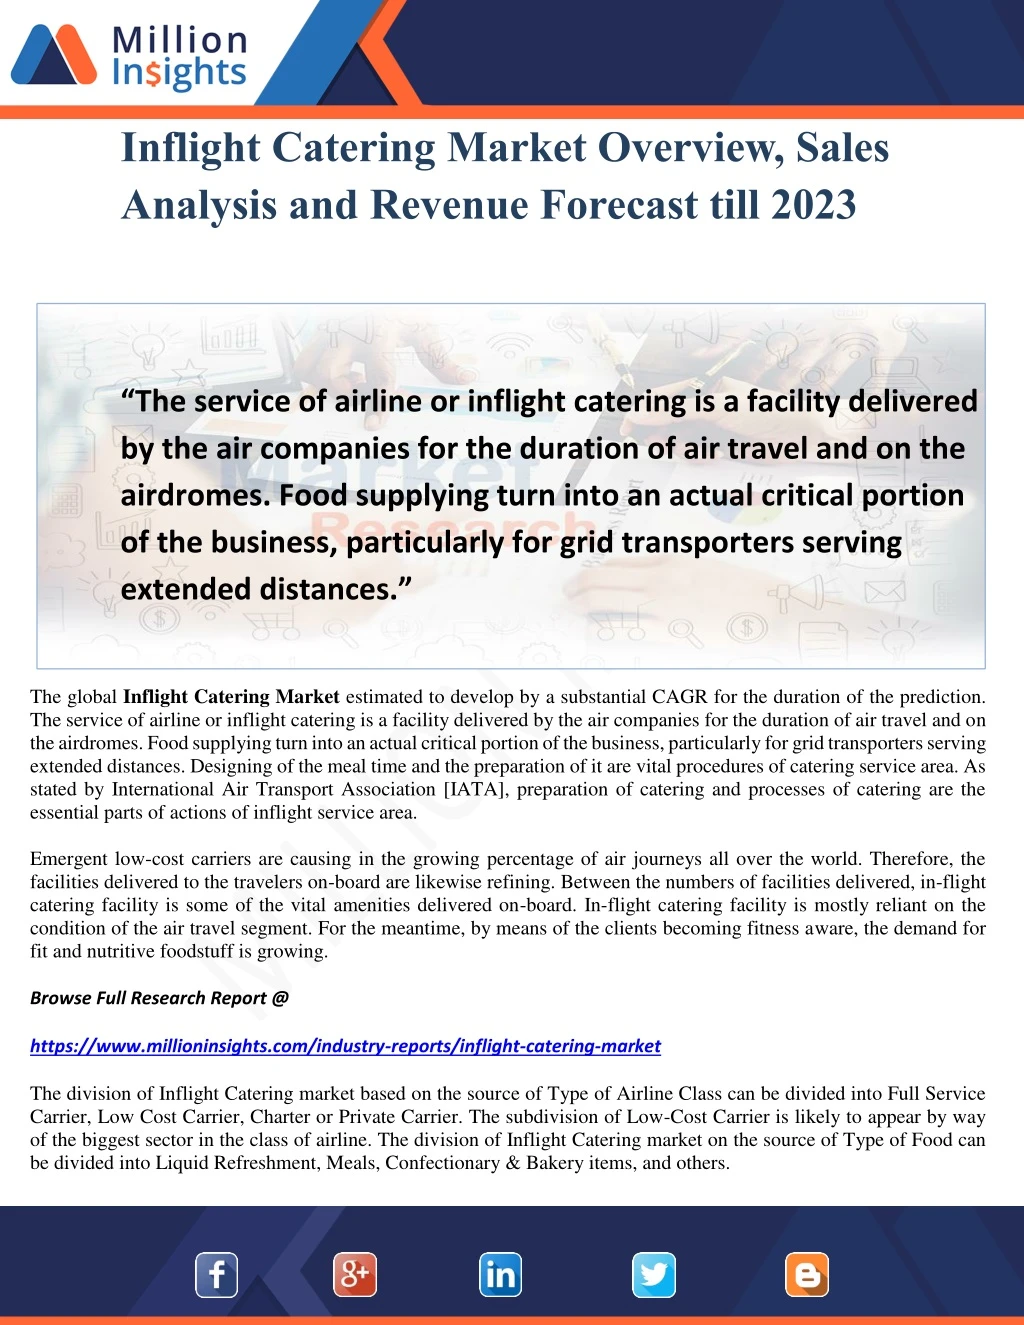 inflight catering market overview sales analysis